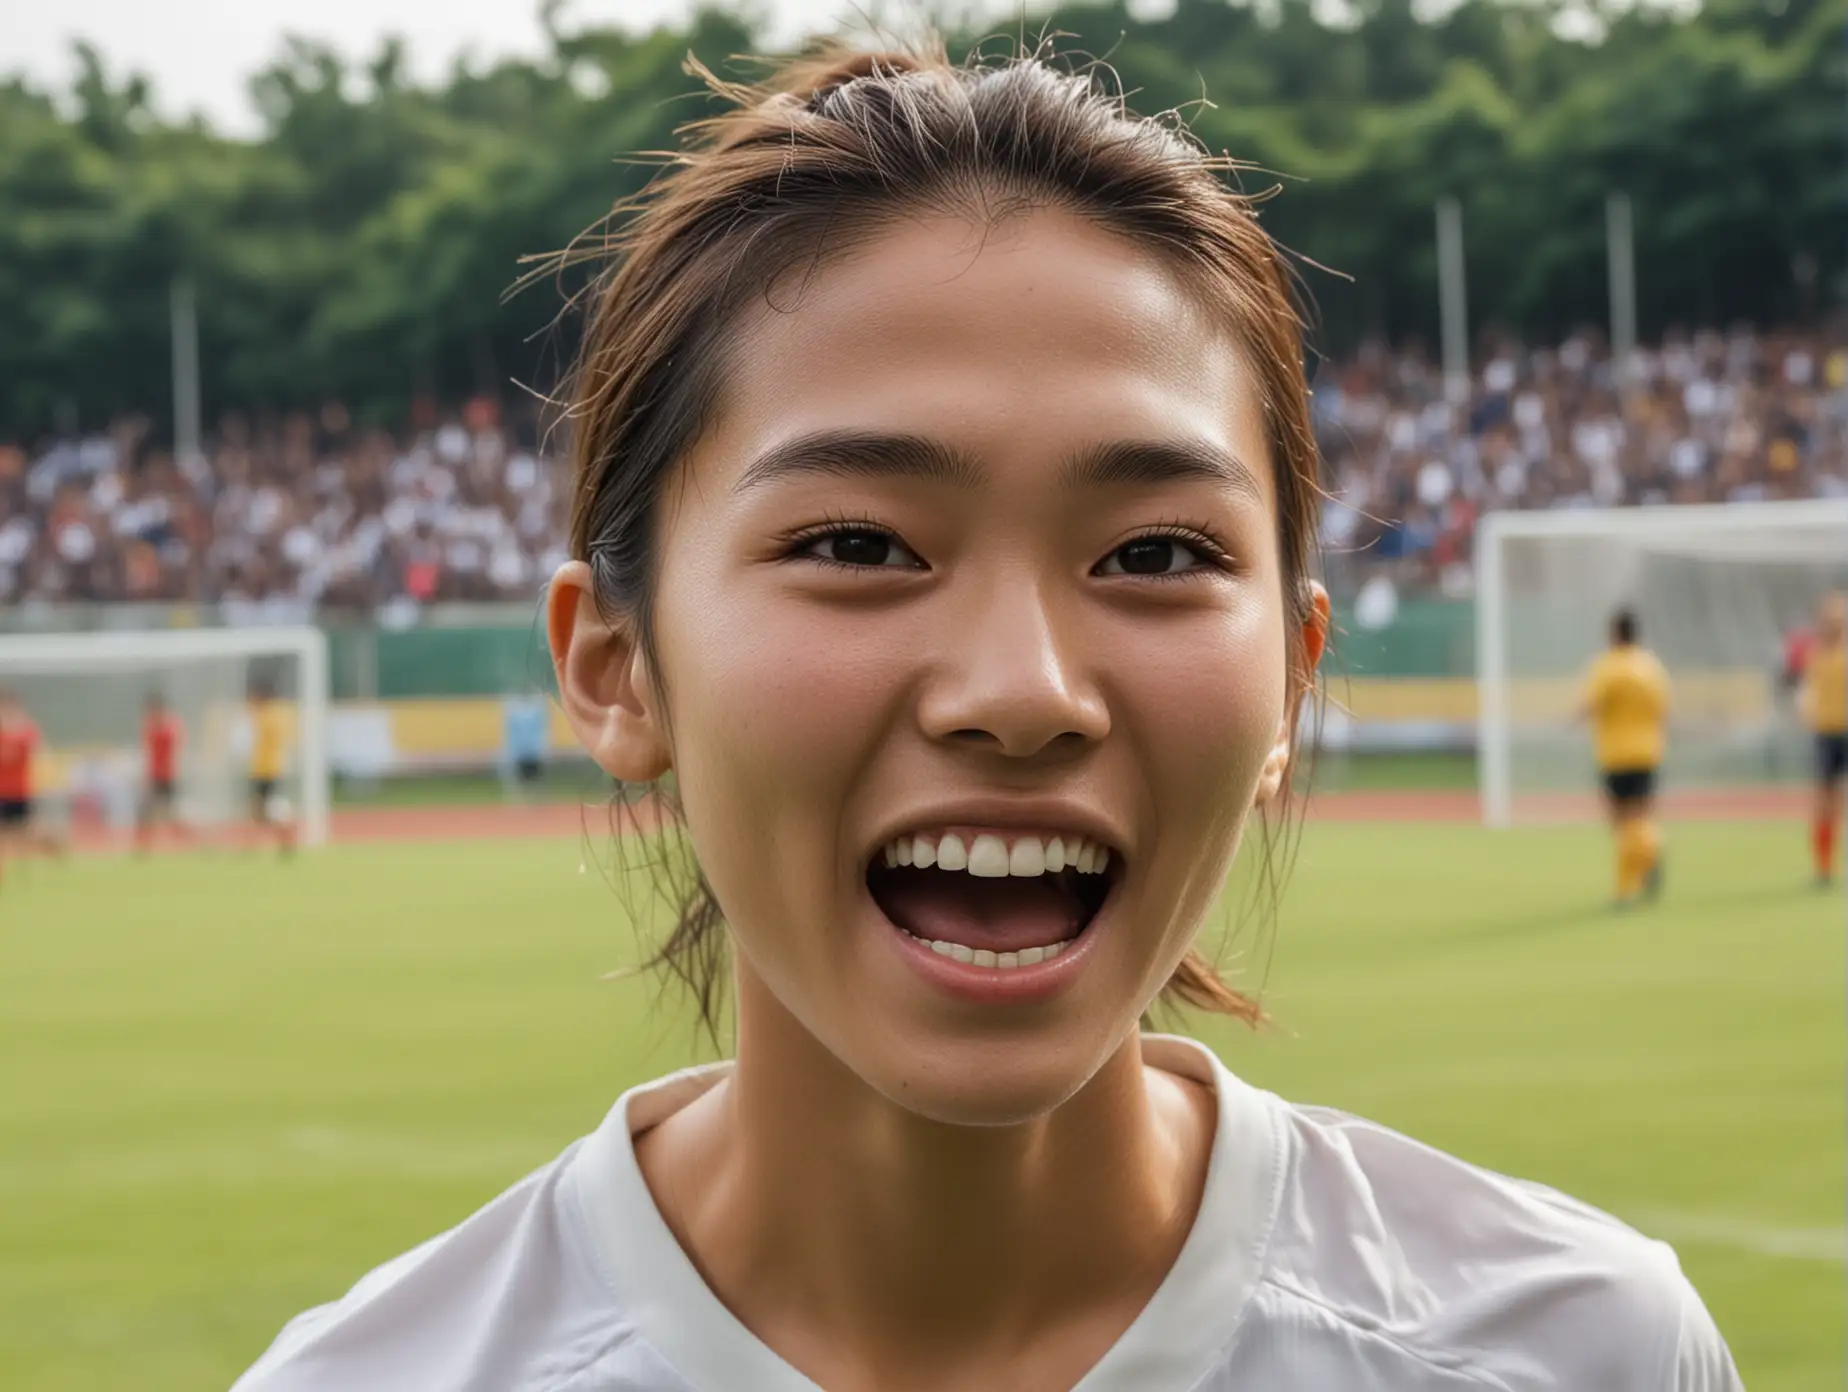 Close up natural face without make-up of a beautiful very skinny Thai women's college soccer player joyfully celebrating a glorious goal.